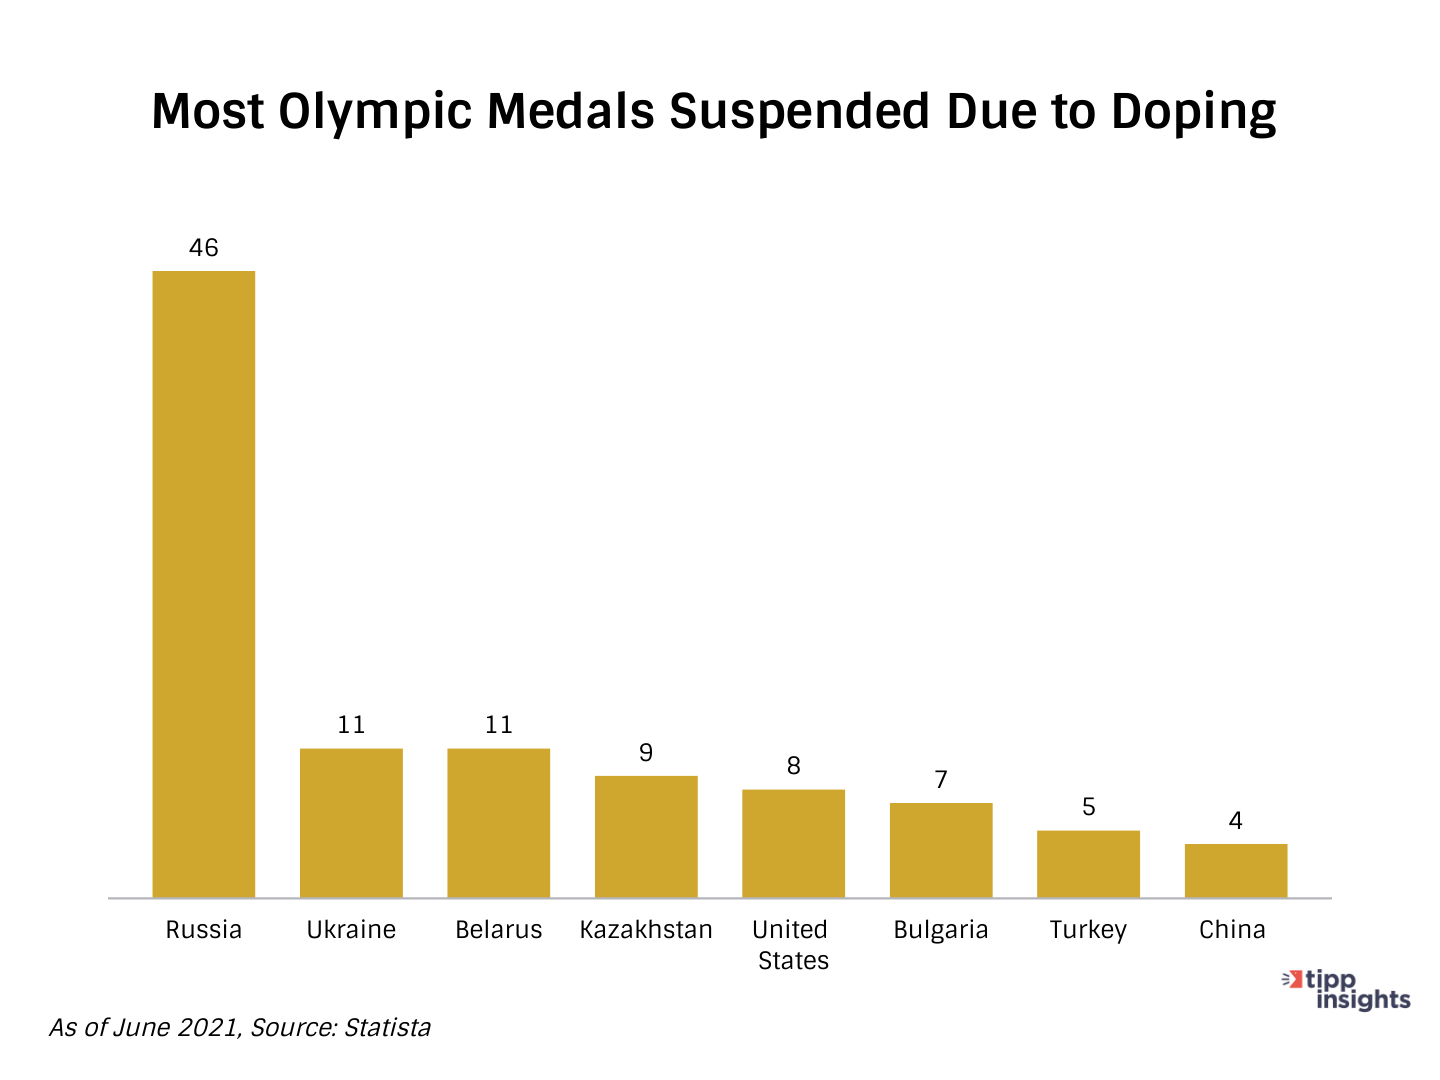 Most olympic medals suspended due to doping (statista chart)